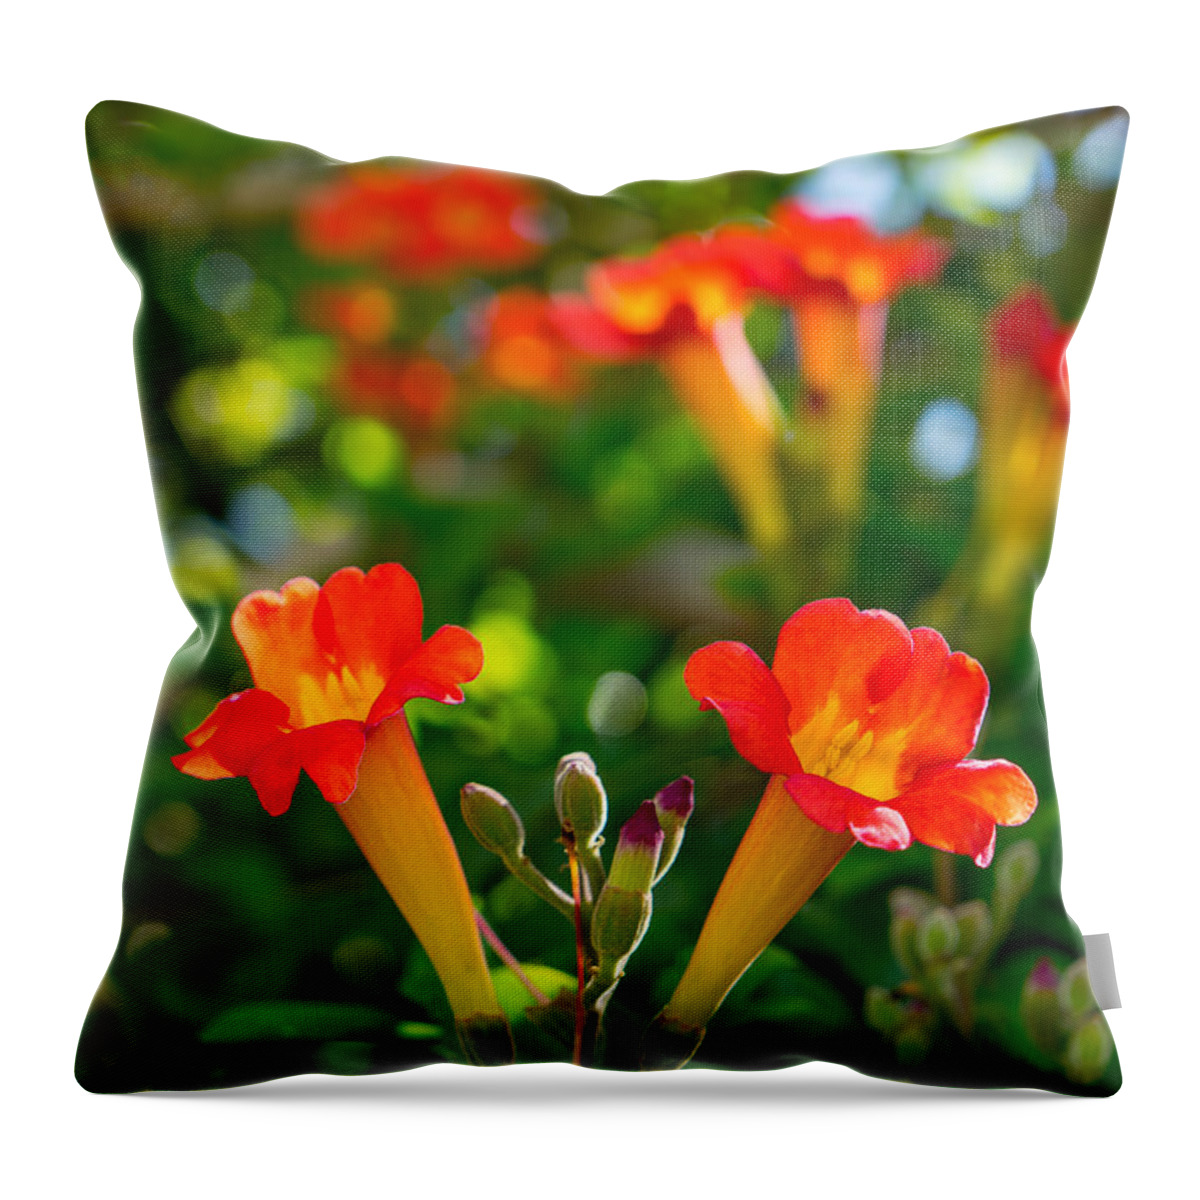 Flowers Throw Pillow featuring the photograph Afternoon Flowers by Derek Dean